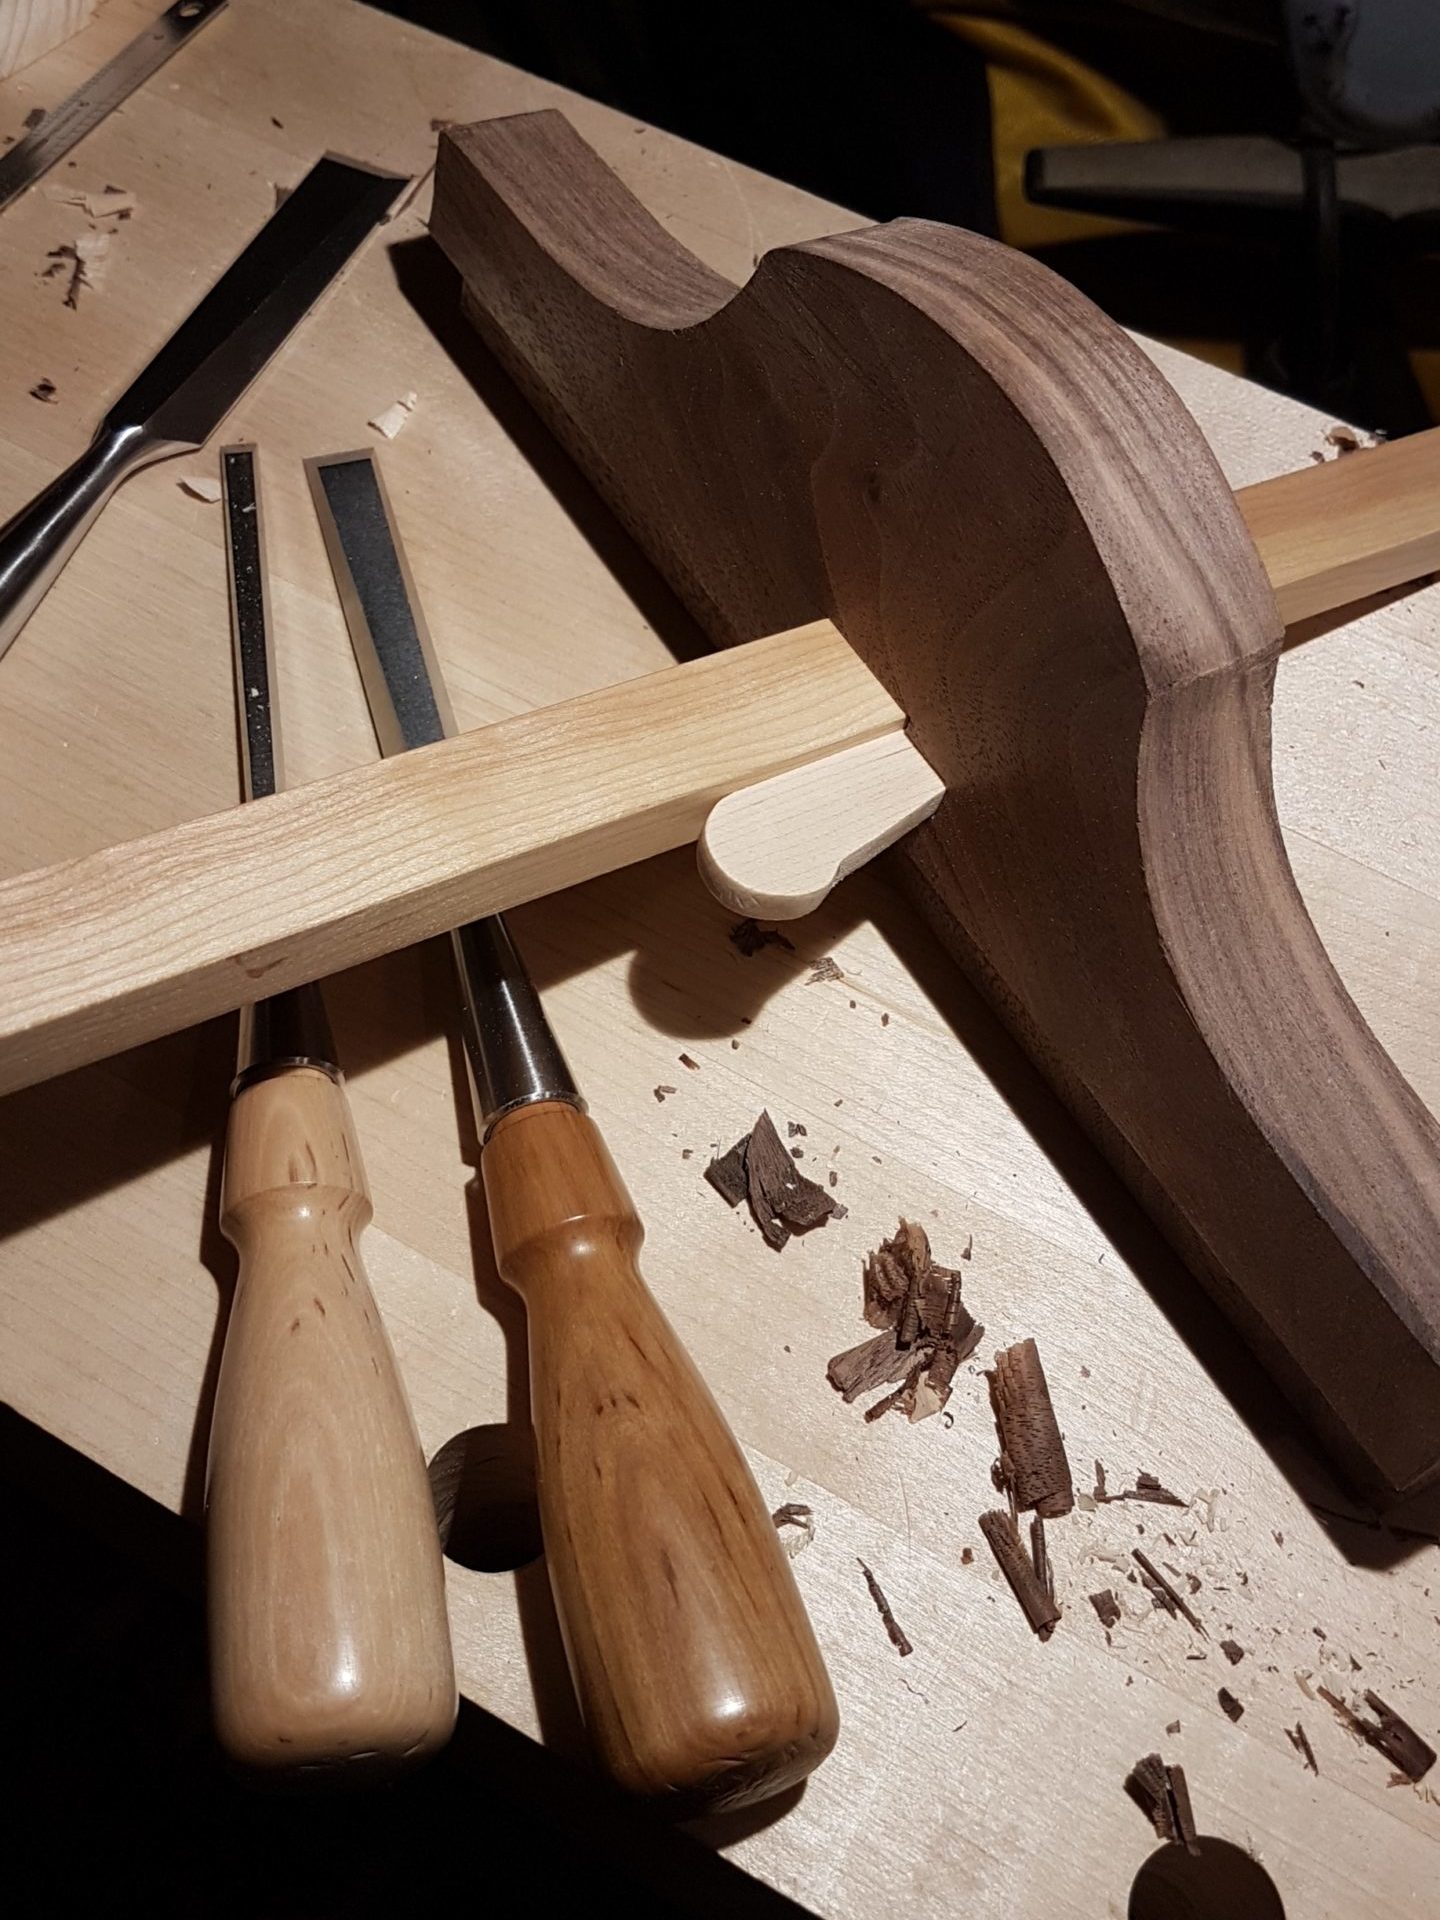 Essential woodworking toolkit - Grant Crawley